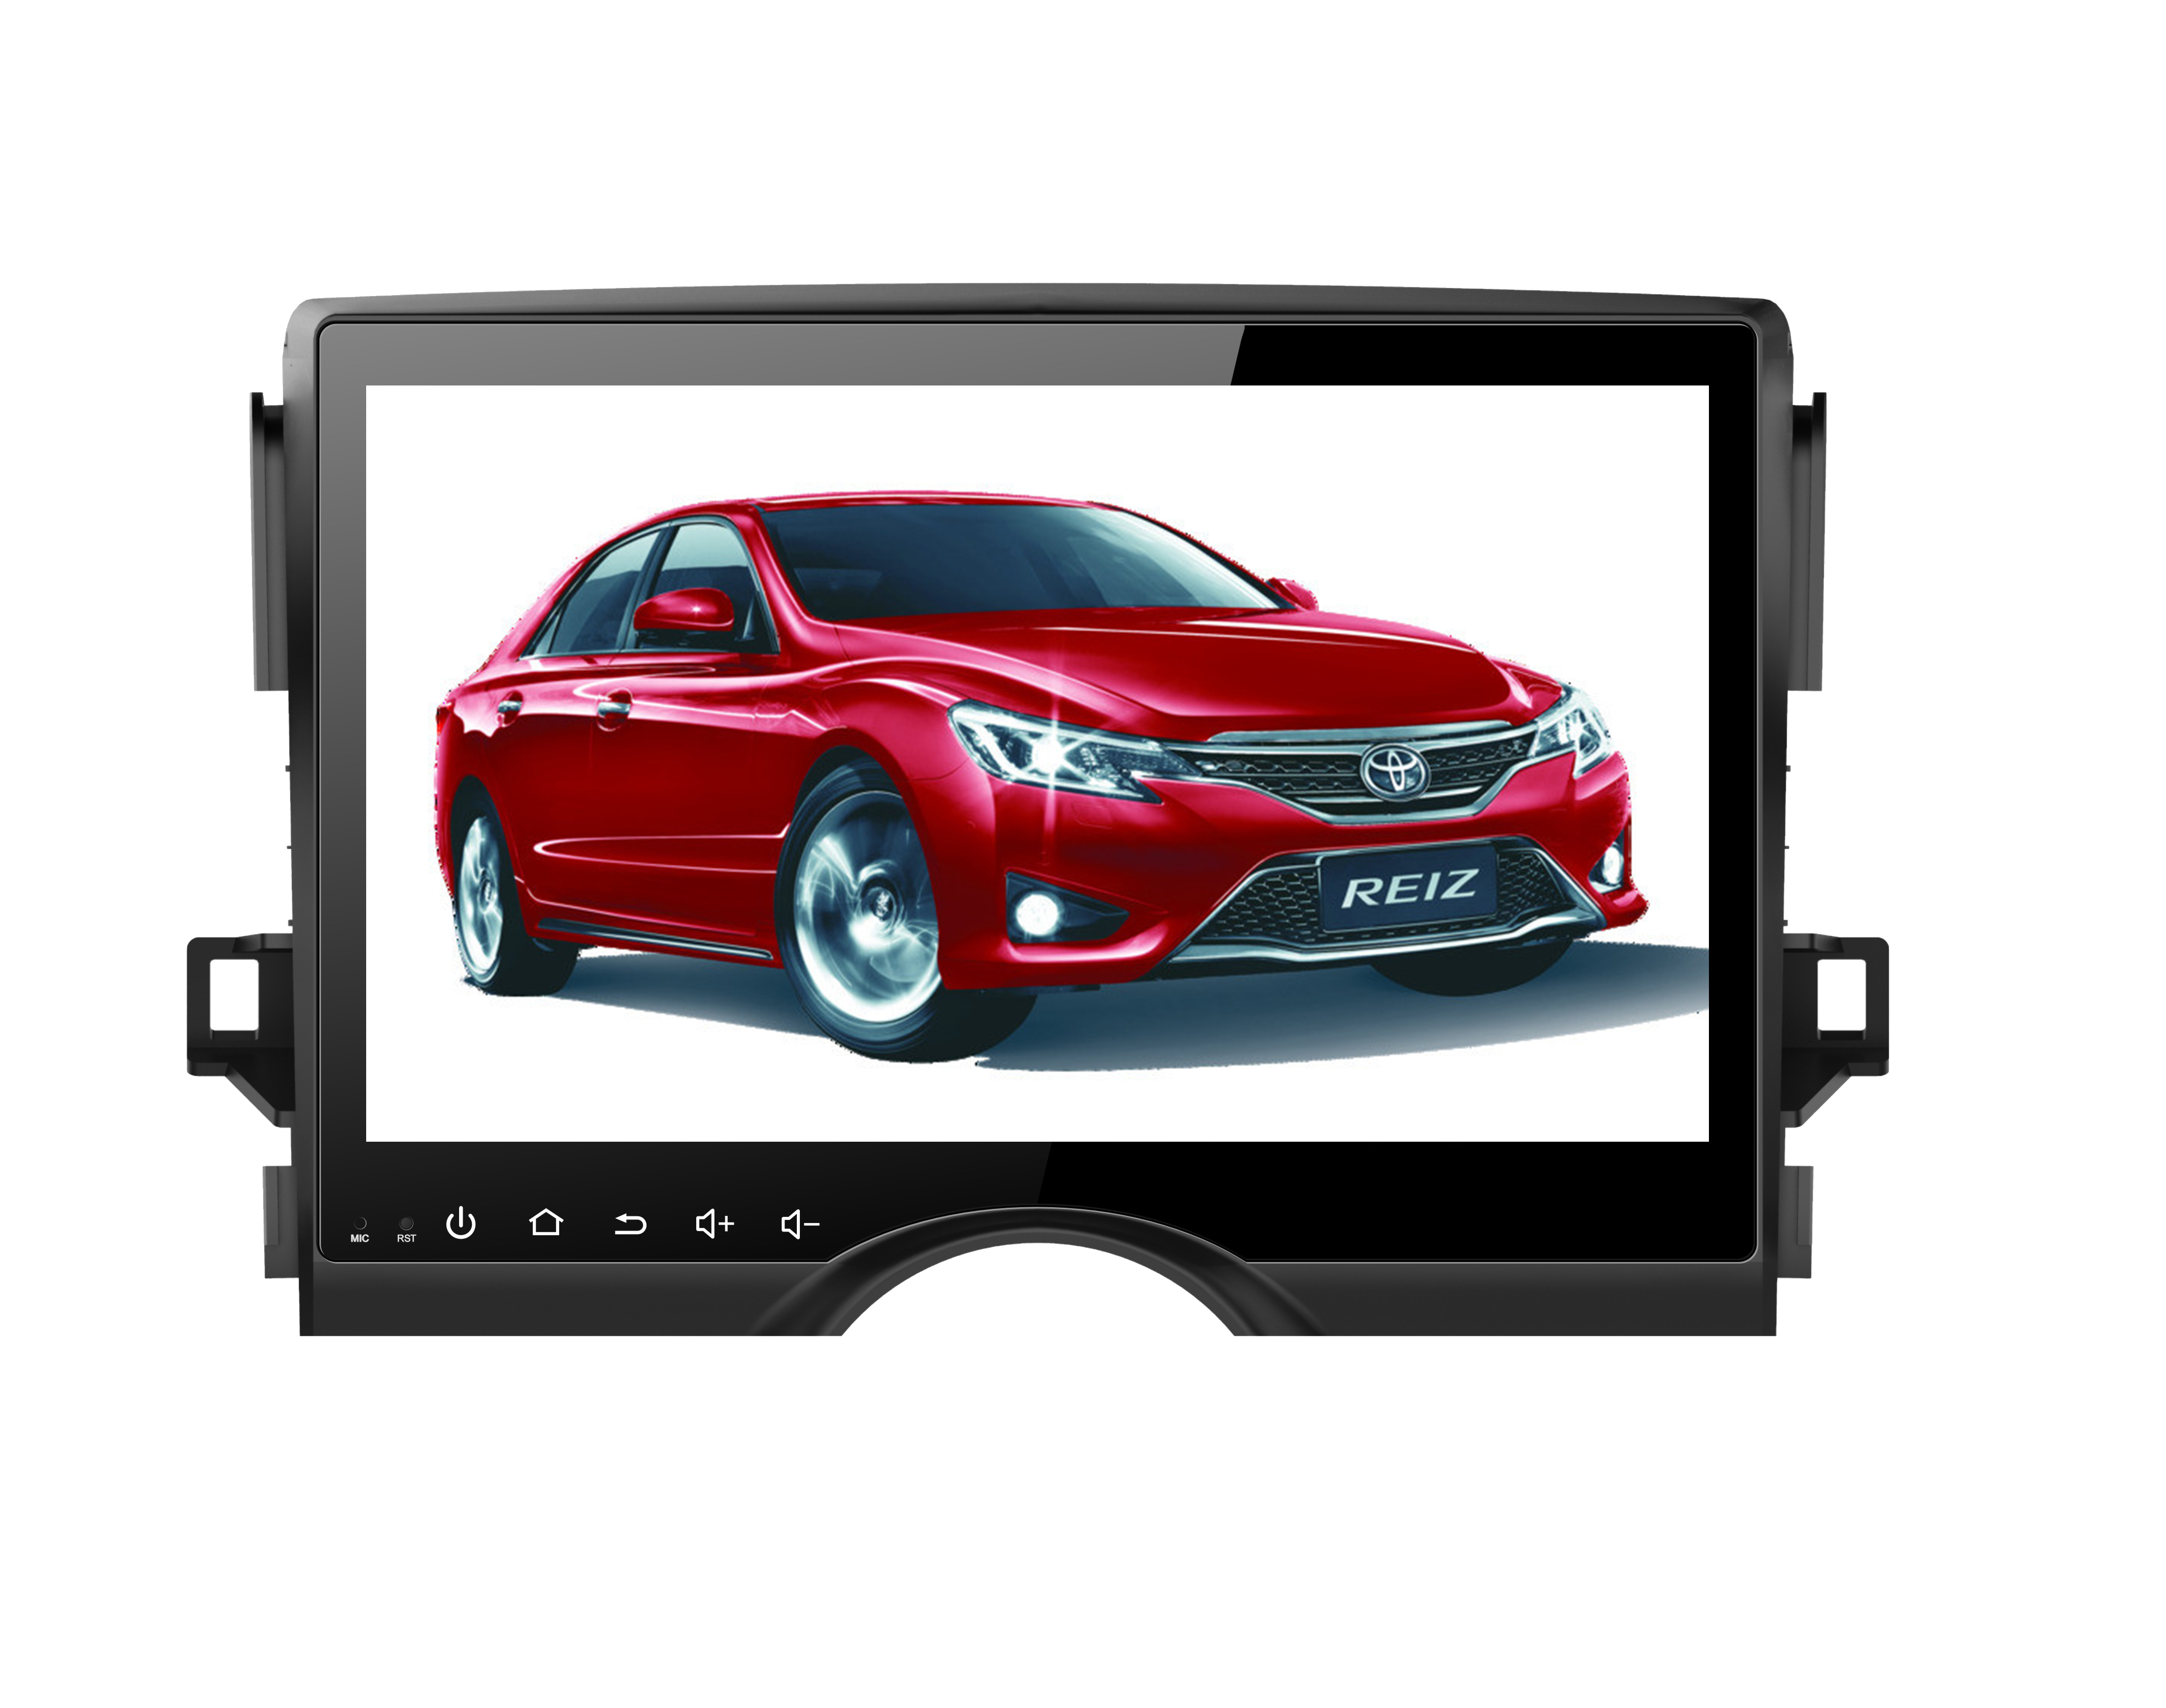 TOYOTA REZI MARK 2011 10.1'' Capacitive Touch Screen Car Pad Android 7.1/6.0 FM AM Radio Auto GPS navi 2G 32G Quad/Eight Cores BT Wifi Mirror link Video Audio in out